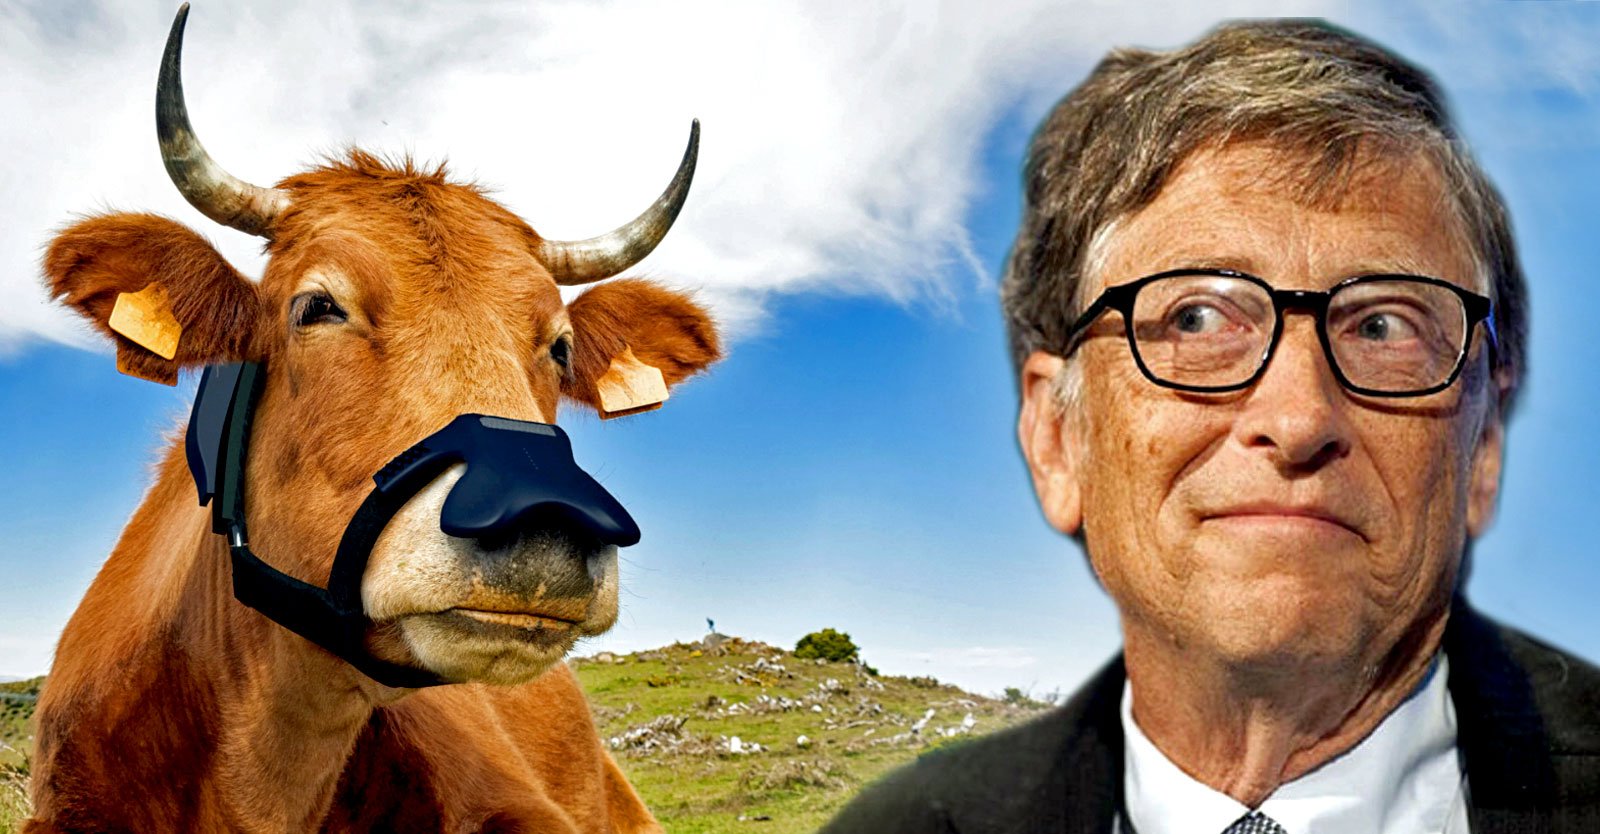 ‘Smart’ Masks for Cows? Gates Invests $4.7 Million in Data-Collecting Faceware for Livestock • Children's Health Defense